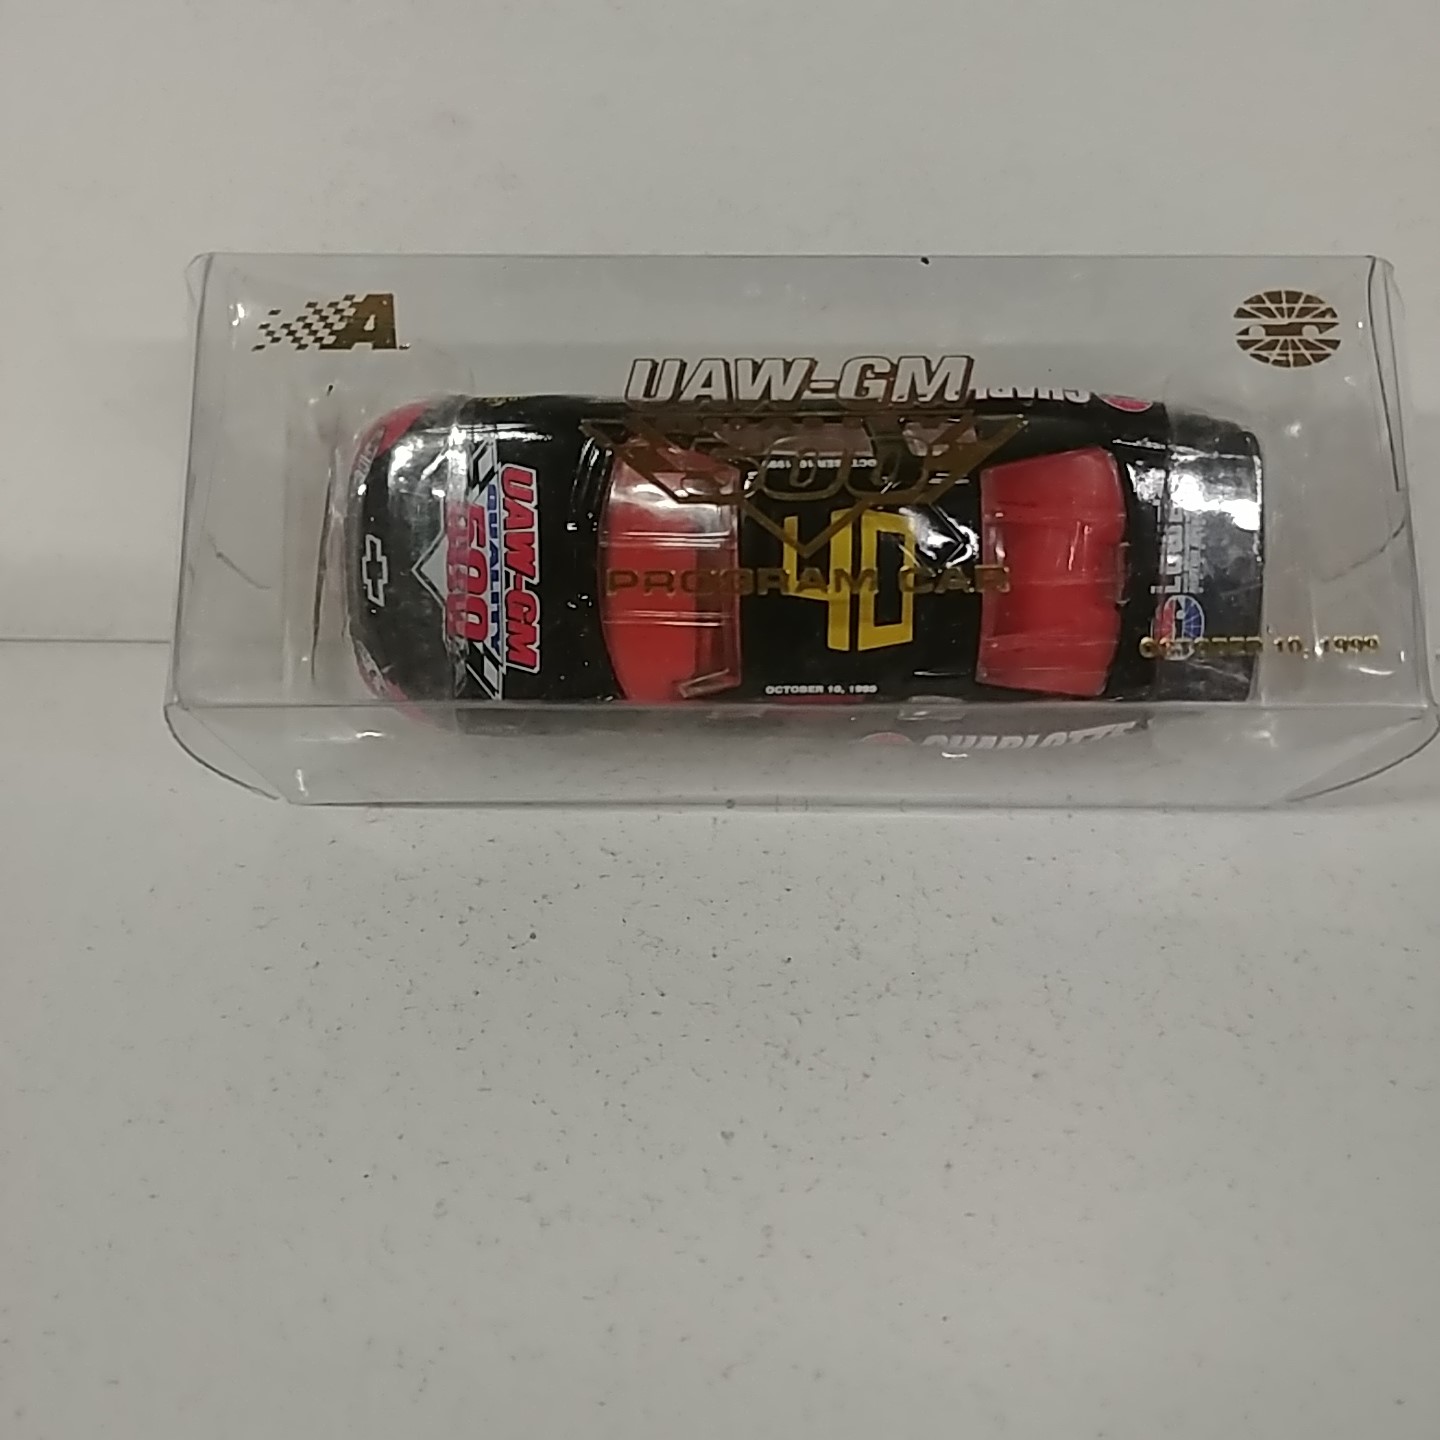 1999 UAW-GM 500 1/64th Charlotte Motor Speedway Event car